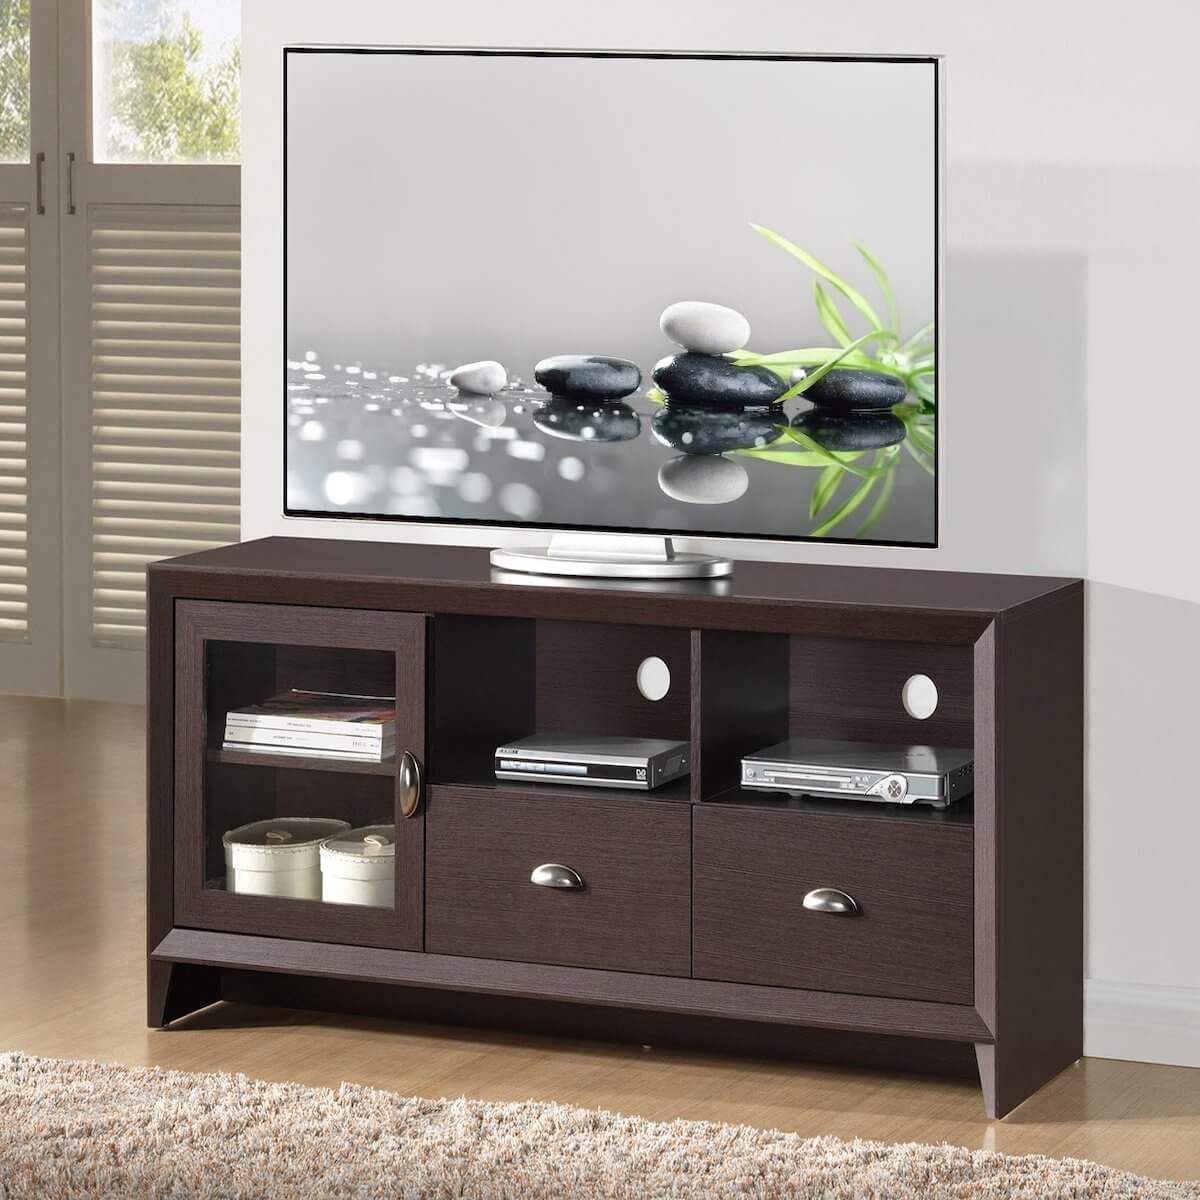 Techni Mobili Wenge Modern TV Stand with Storage for TVs Up To 60" RTA-8807-WN in Room